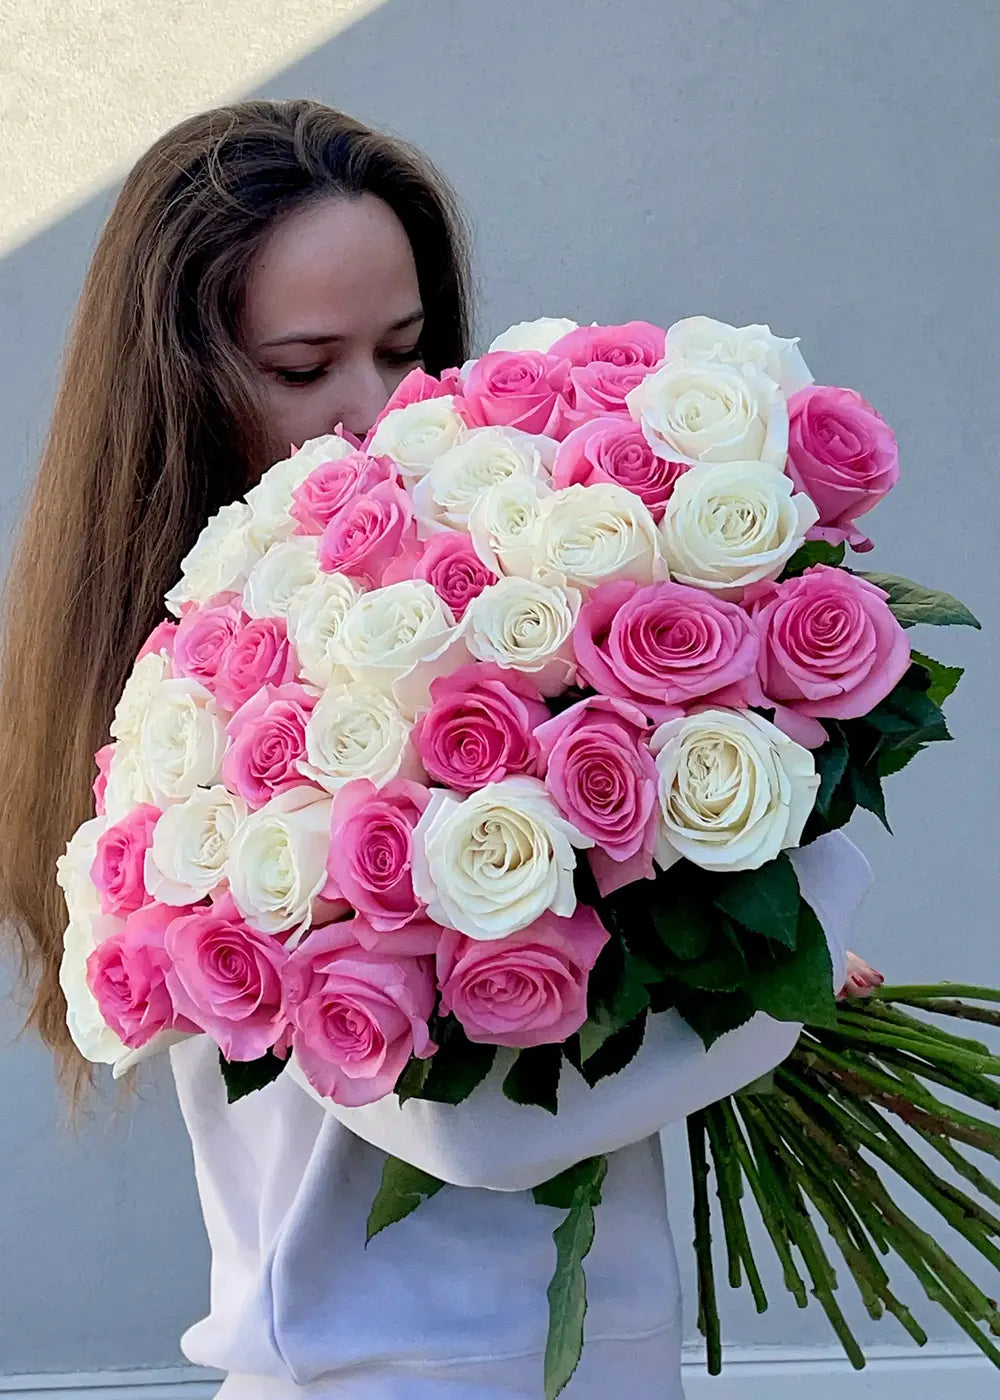 NO. 125. Pink and White Roses Bouquet